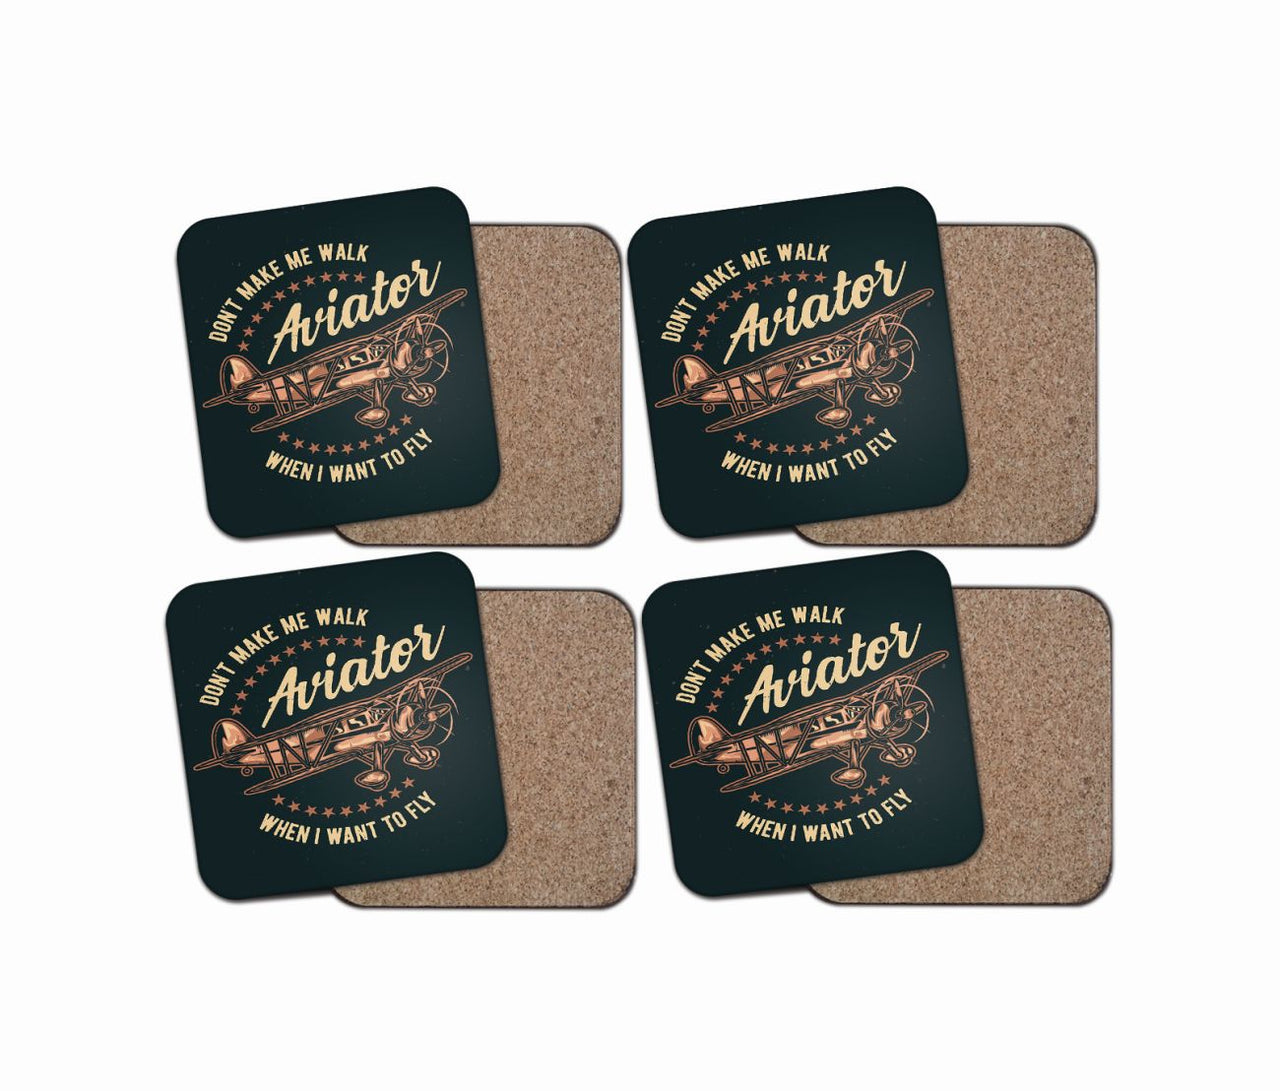 Don't Make me Walk When I want To Fly Designed Coasters